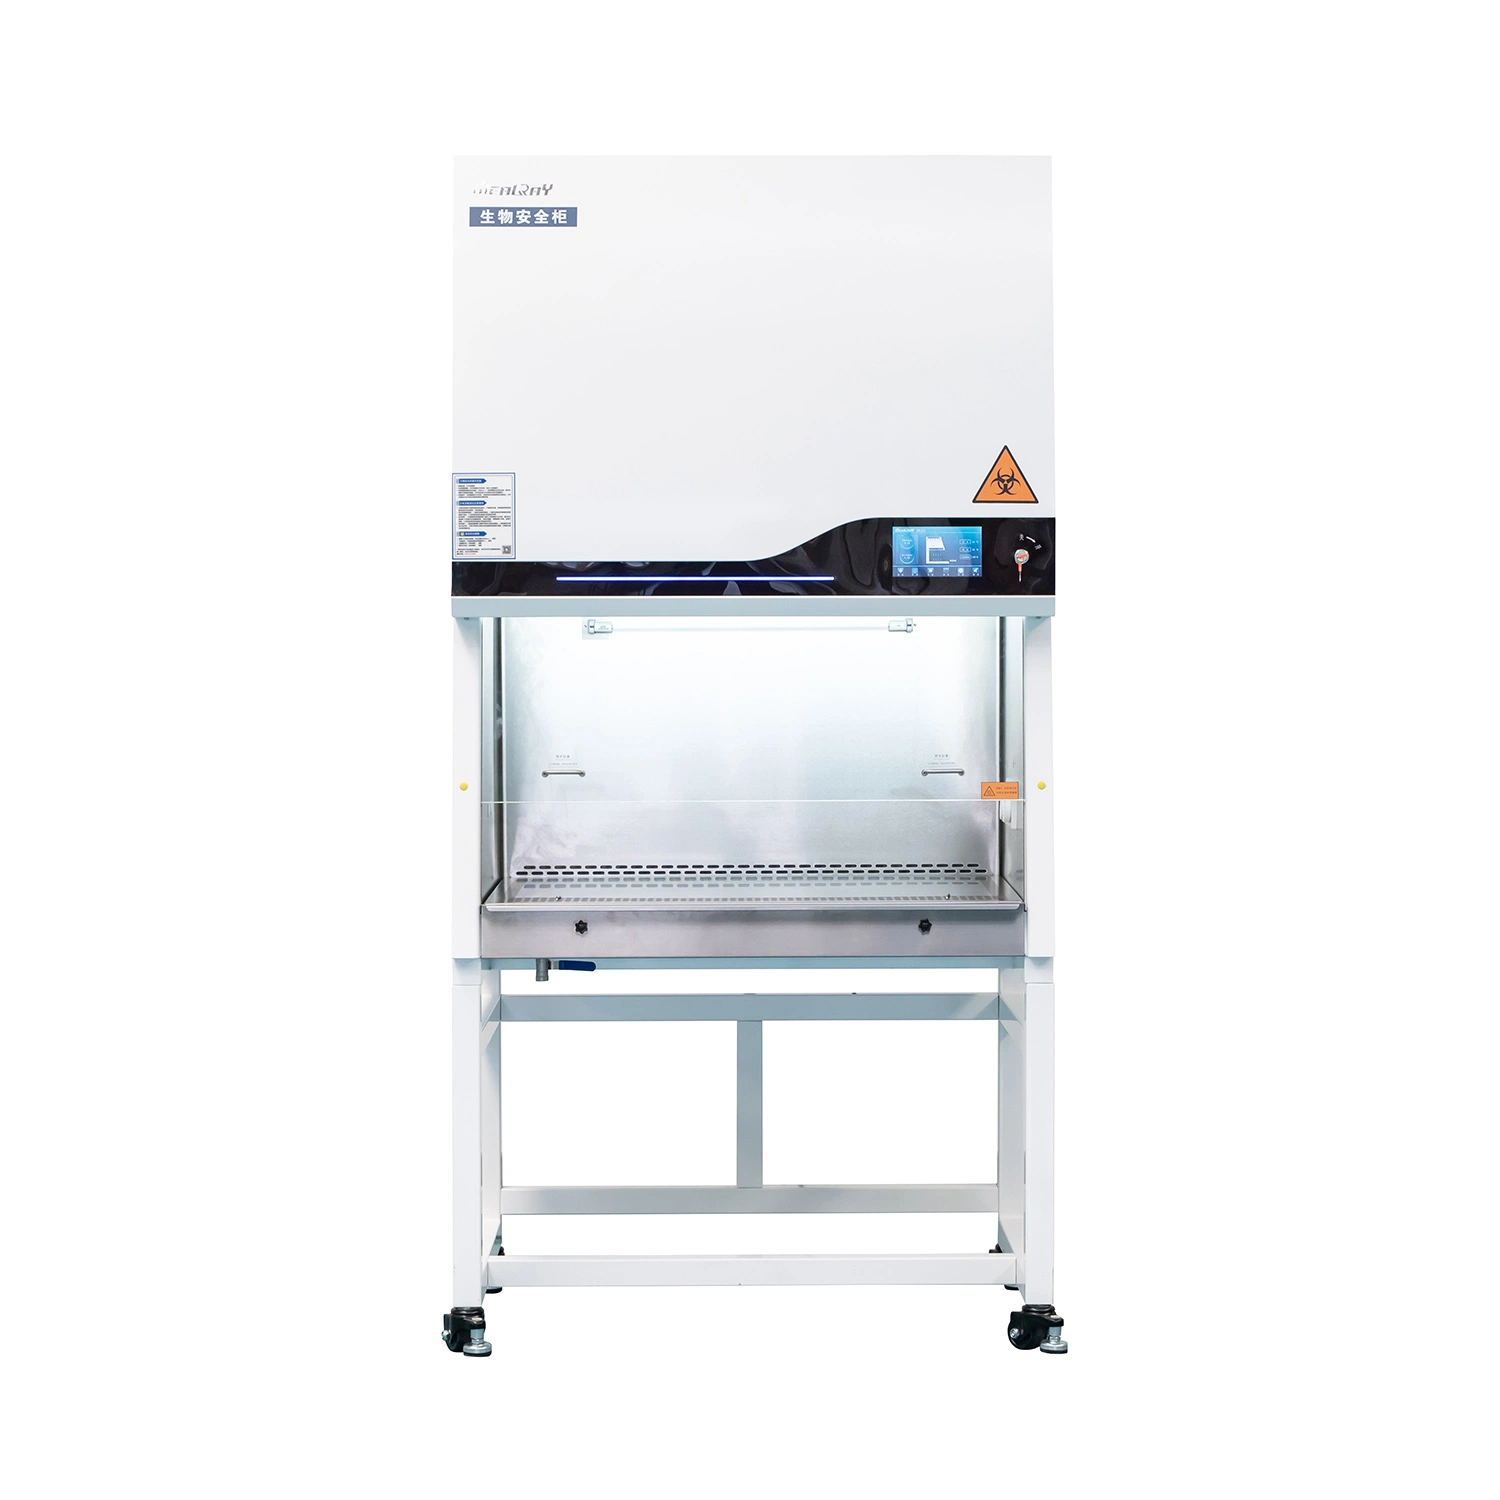 Quality Assurance Biological Safety Biosafety Cabinet Price